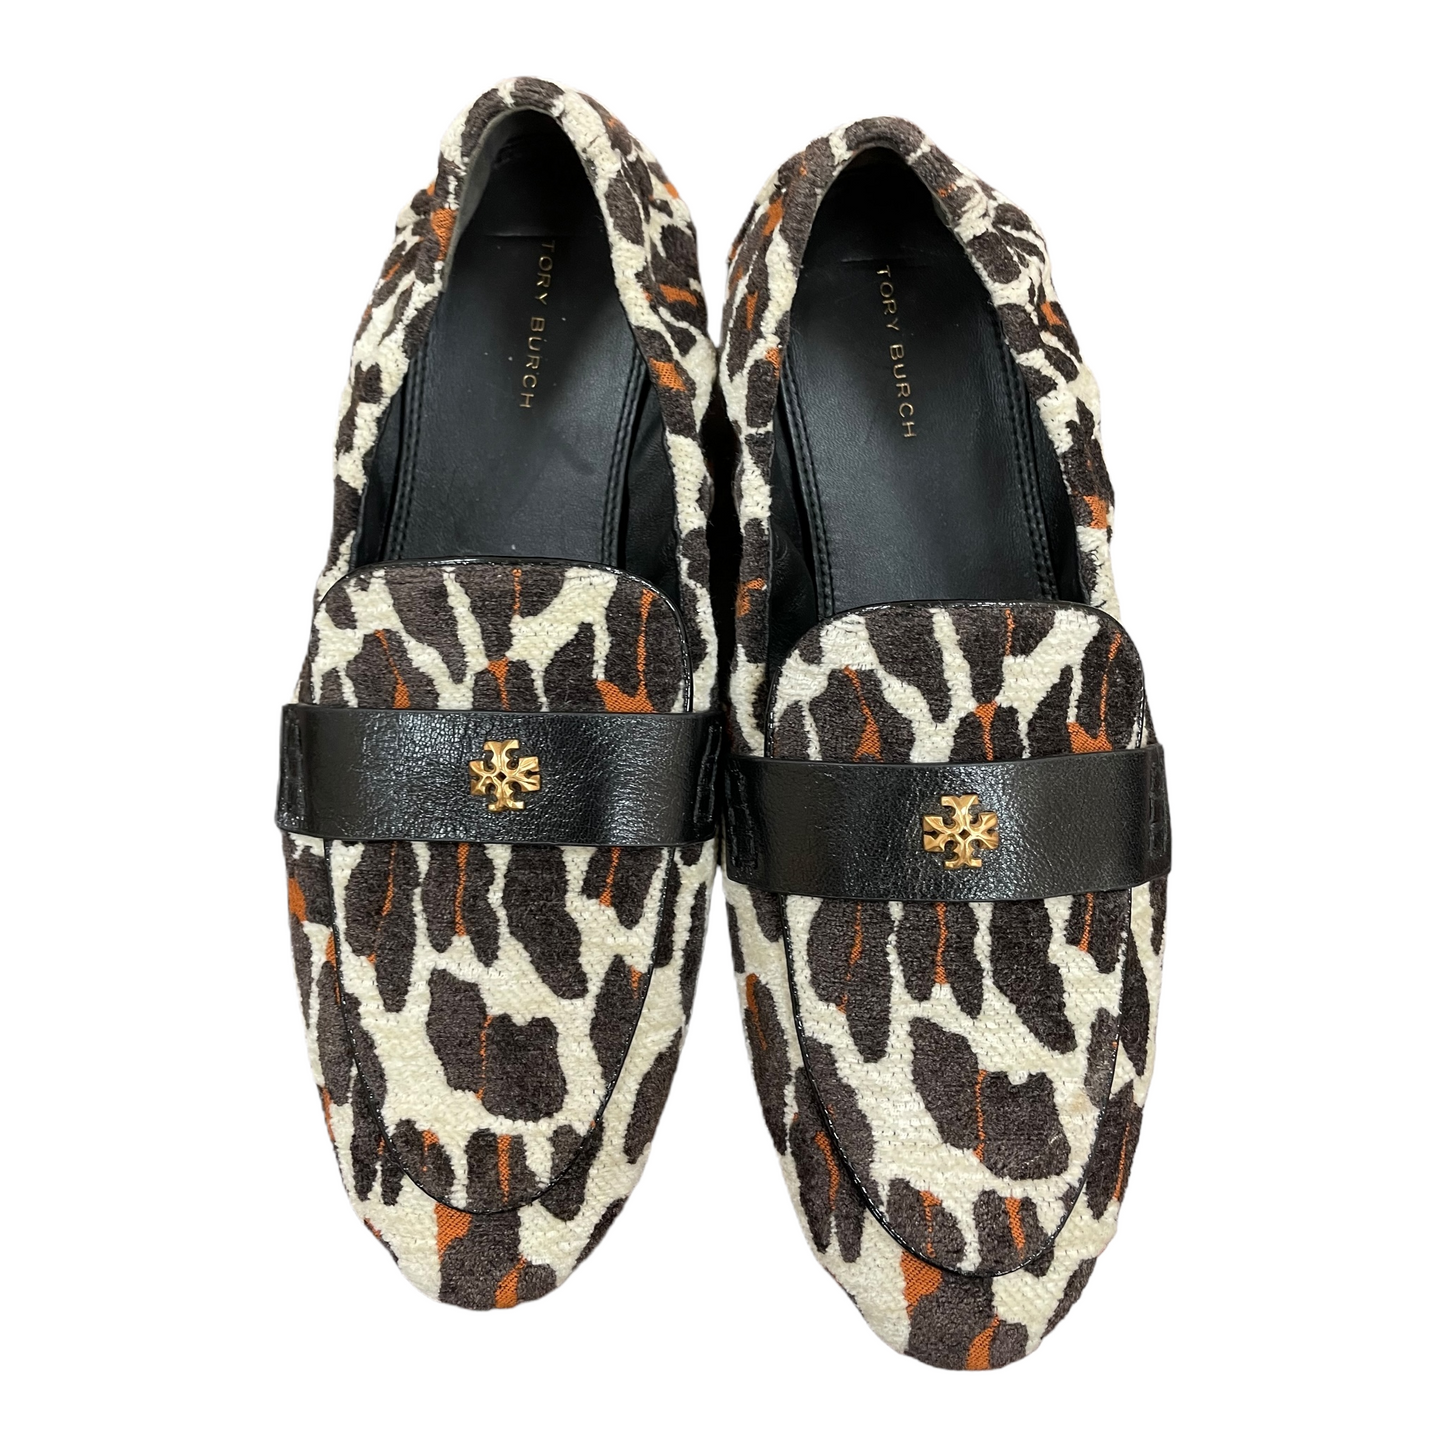 Animal Print Shoes Flats By Tory Burch, Size: 9.5